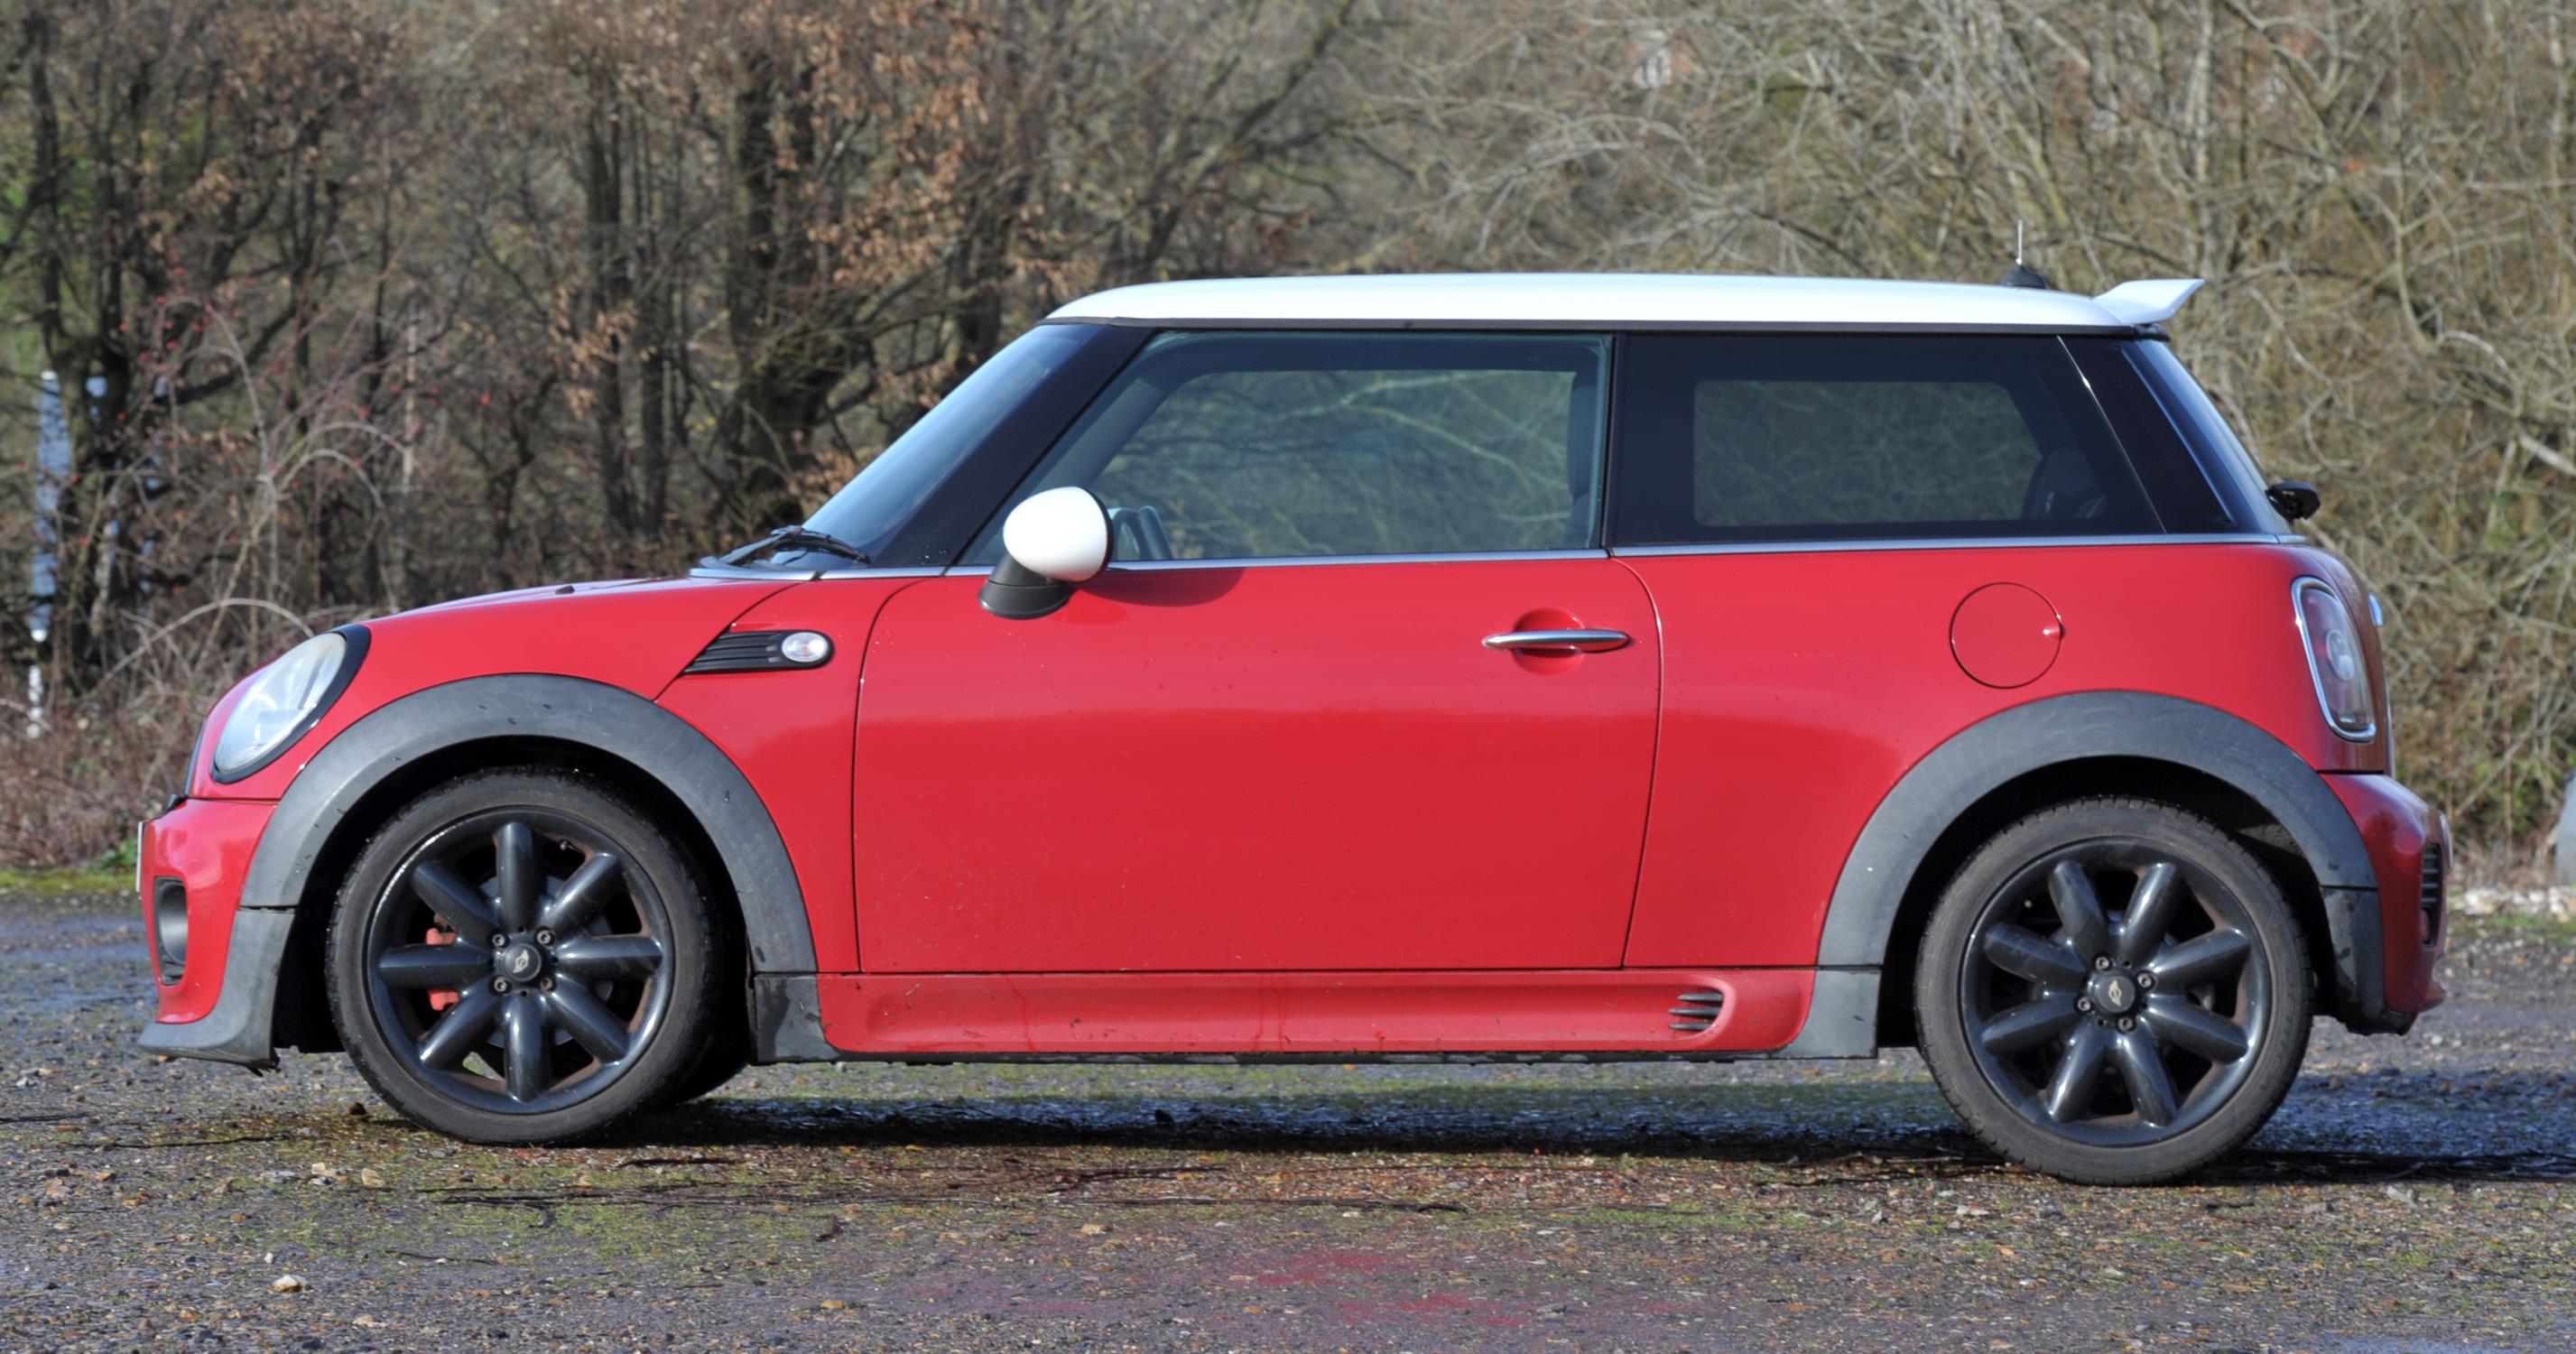 2007 Mini 1.6 Cooper Petrol with John Cooper Works Areo Body Kit. Registration number: SP57 GHH. - Image 5 of 14